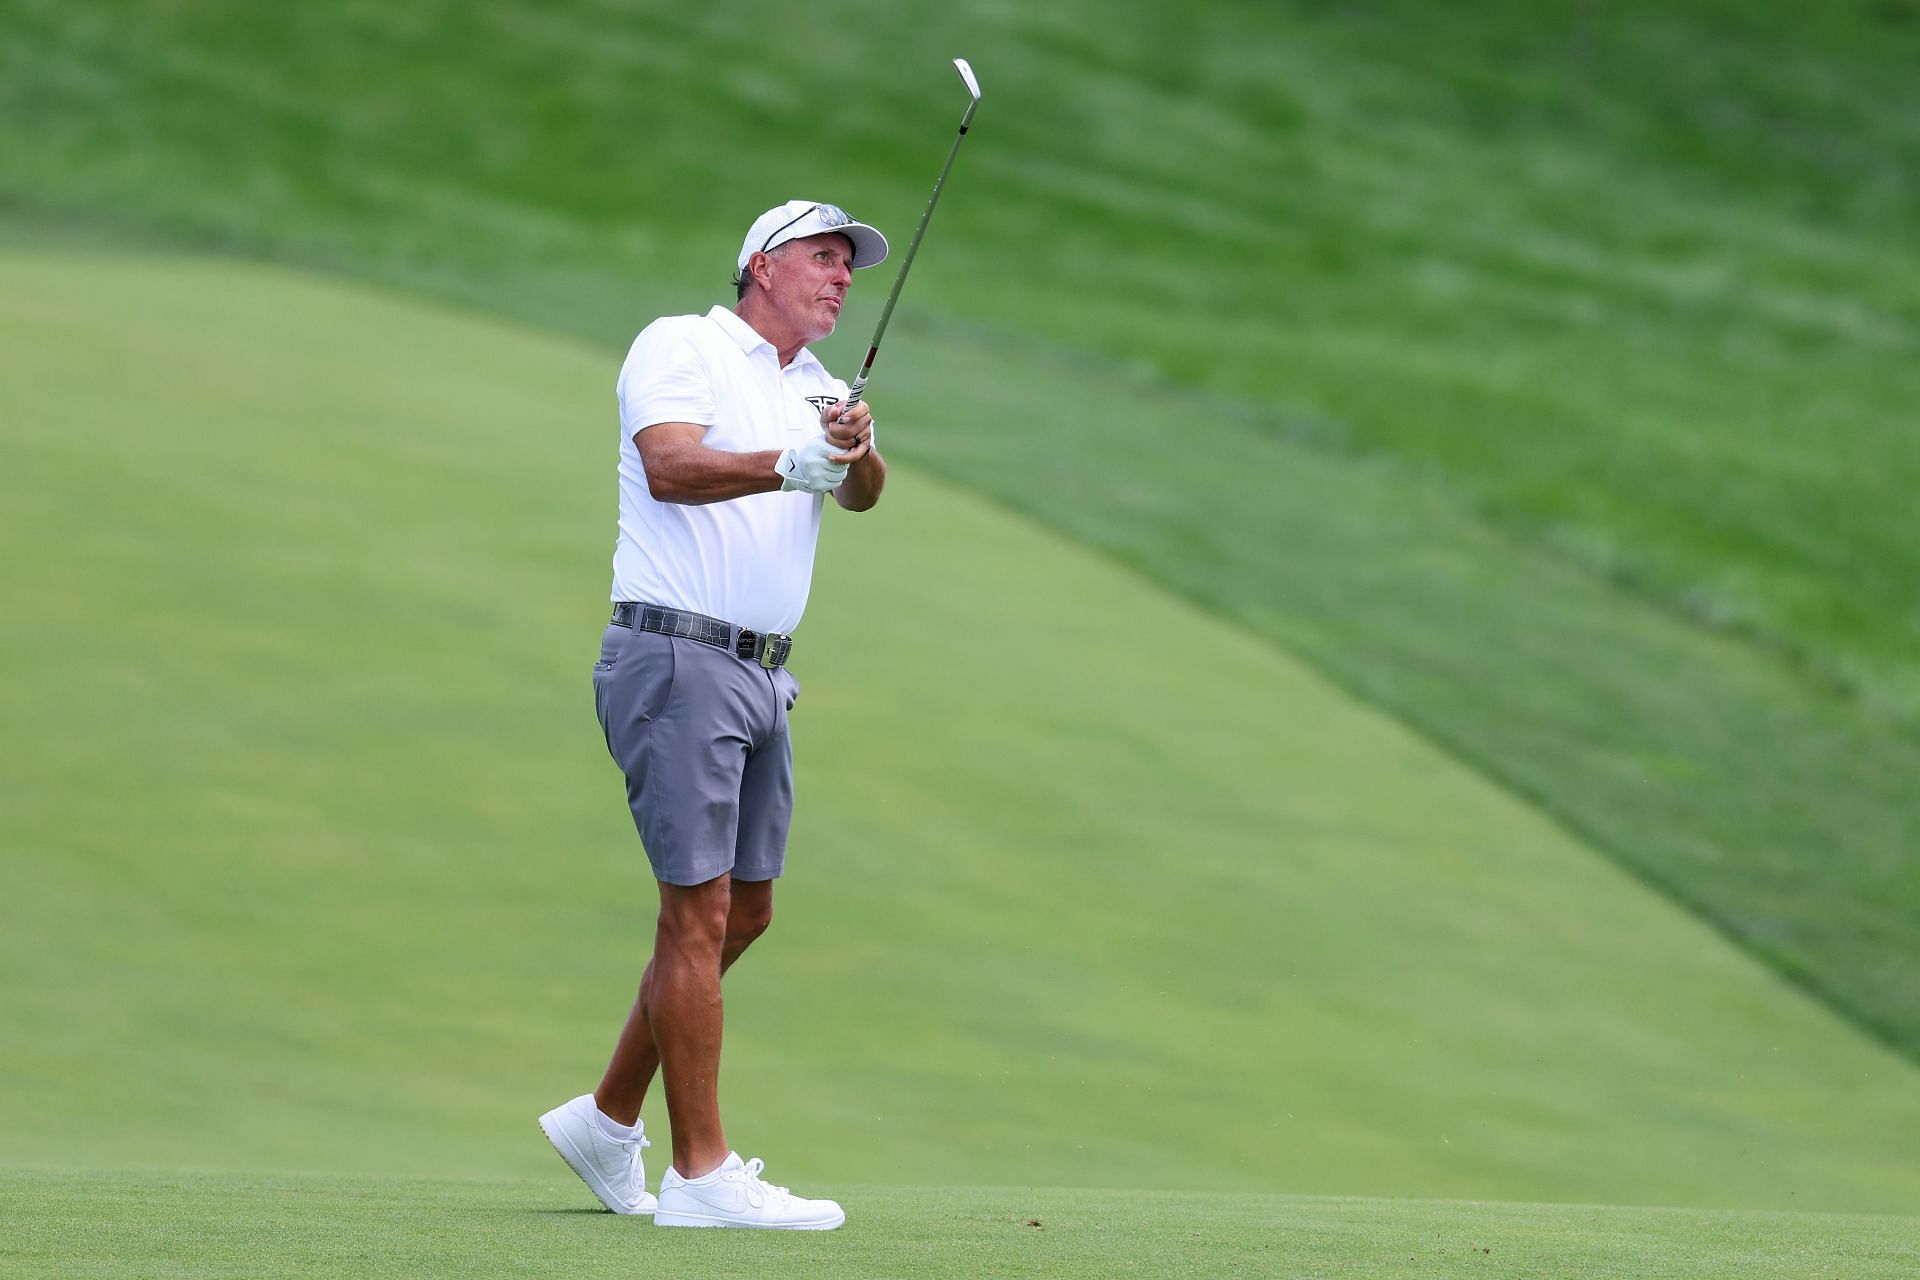 Phil Mickelson is not as beloved anymore